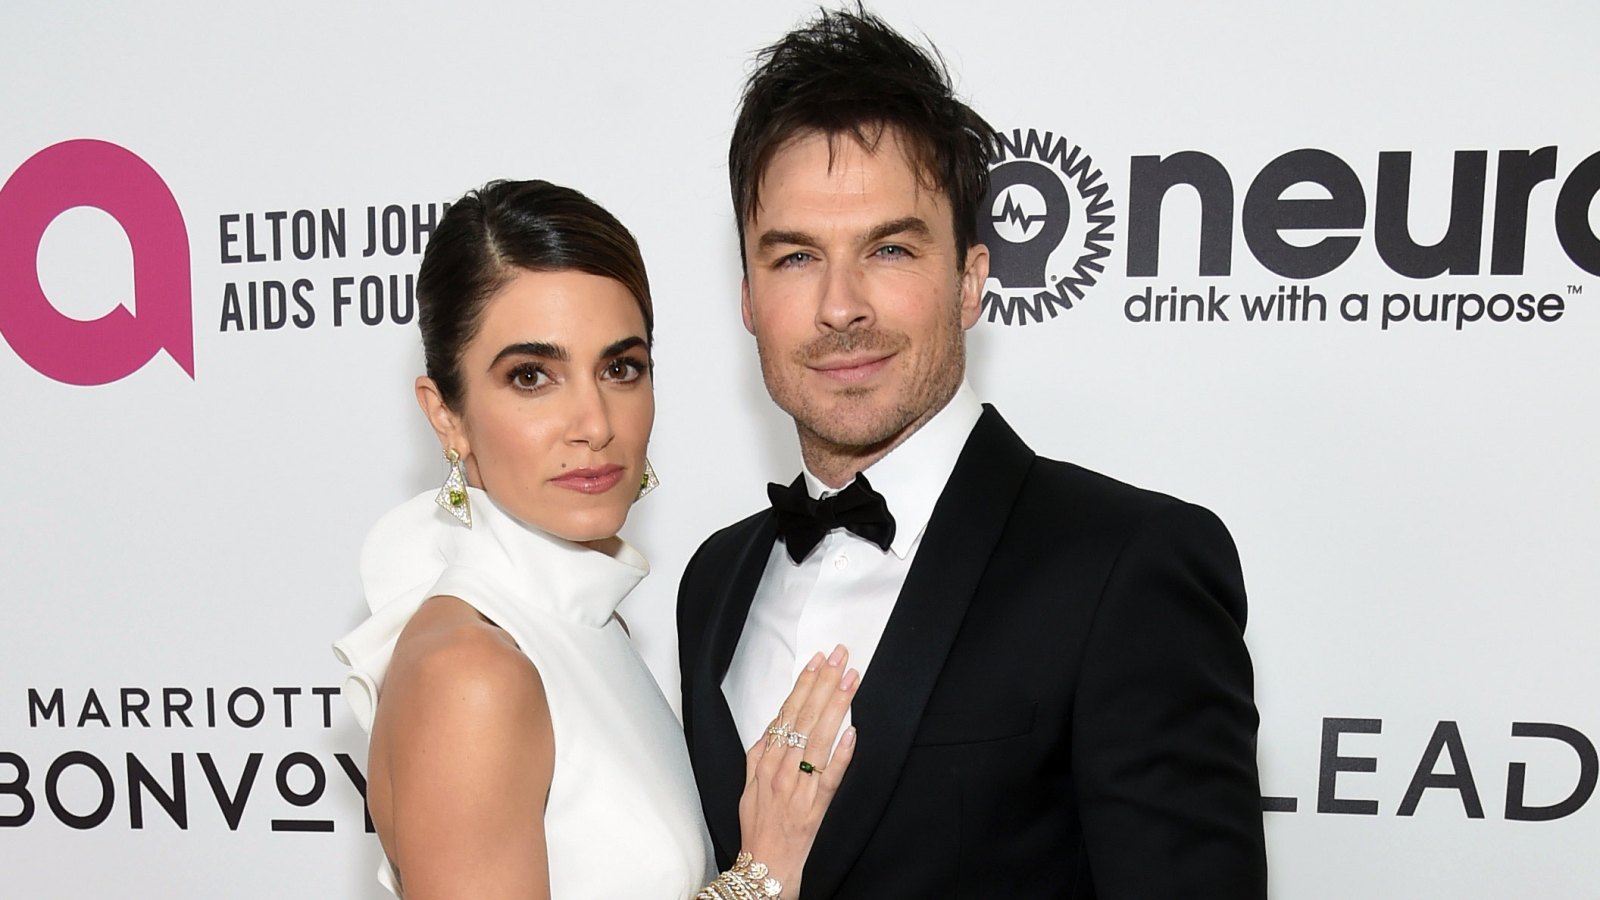 Ian Somerhalder and Nikki Reed Pay Tribute to Each Other on 4th Anniversary